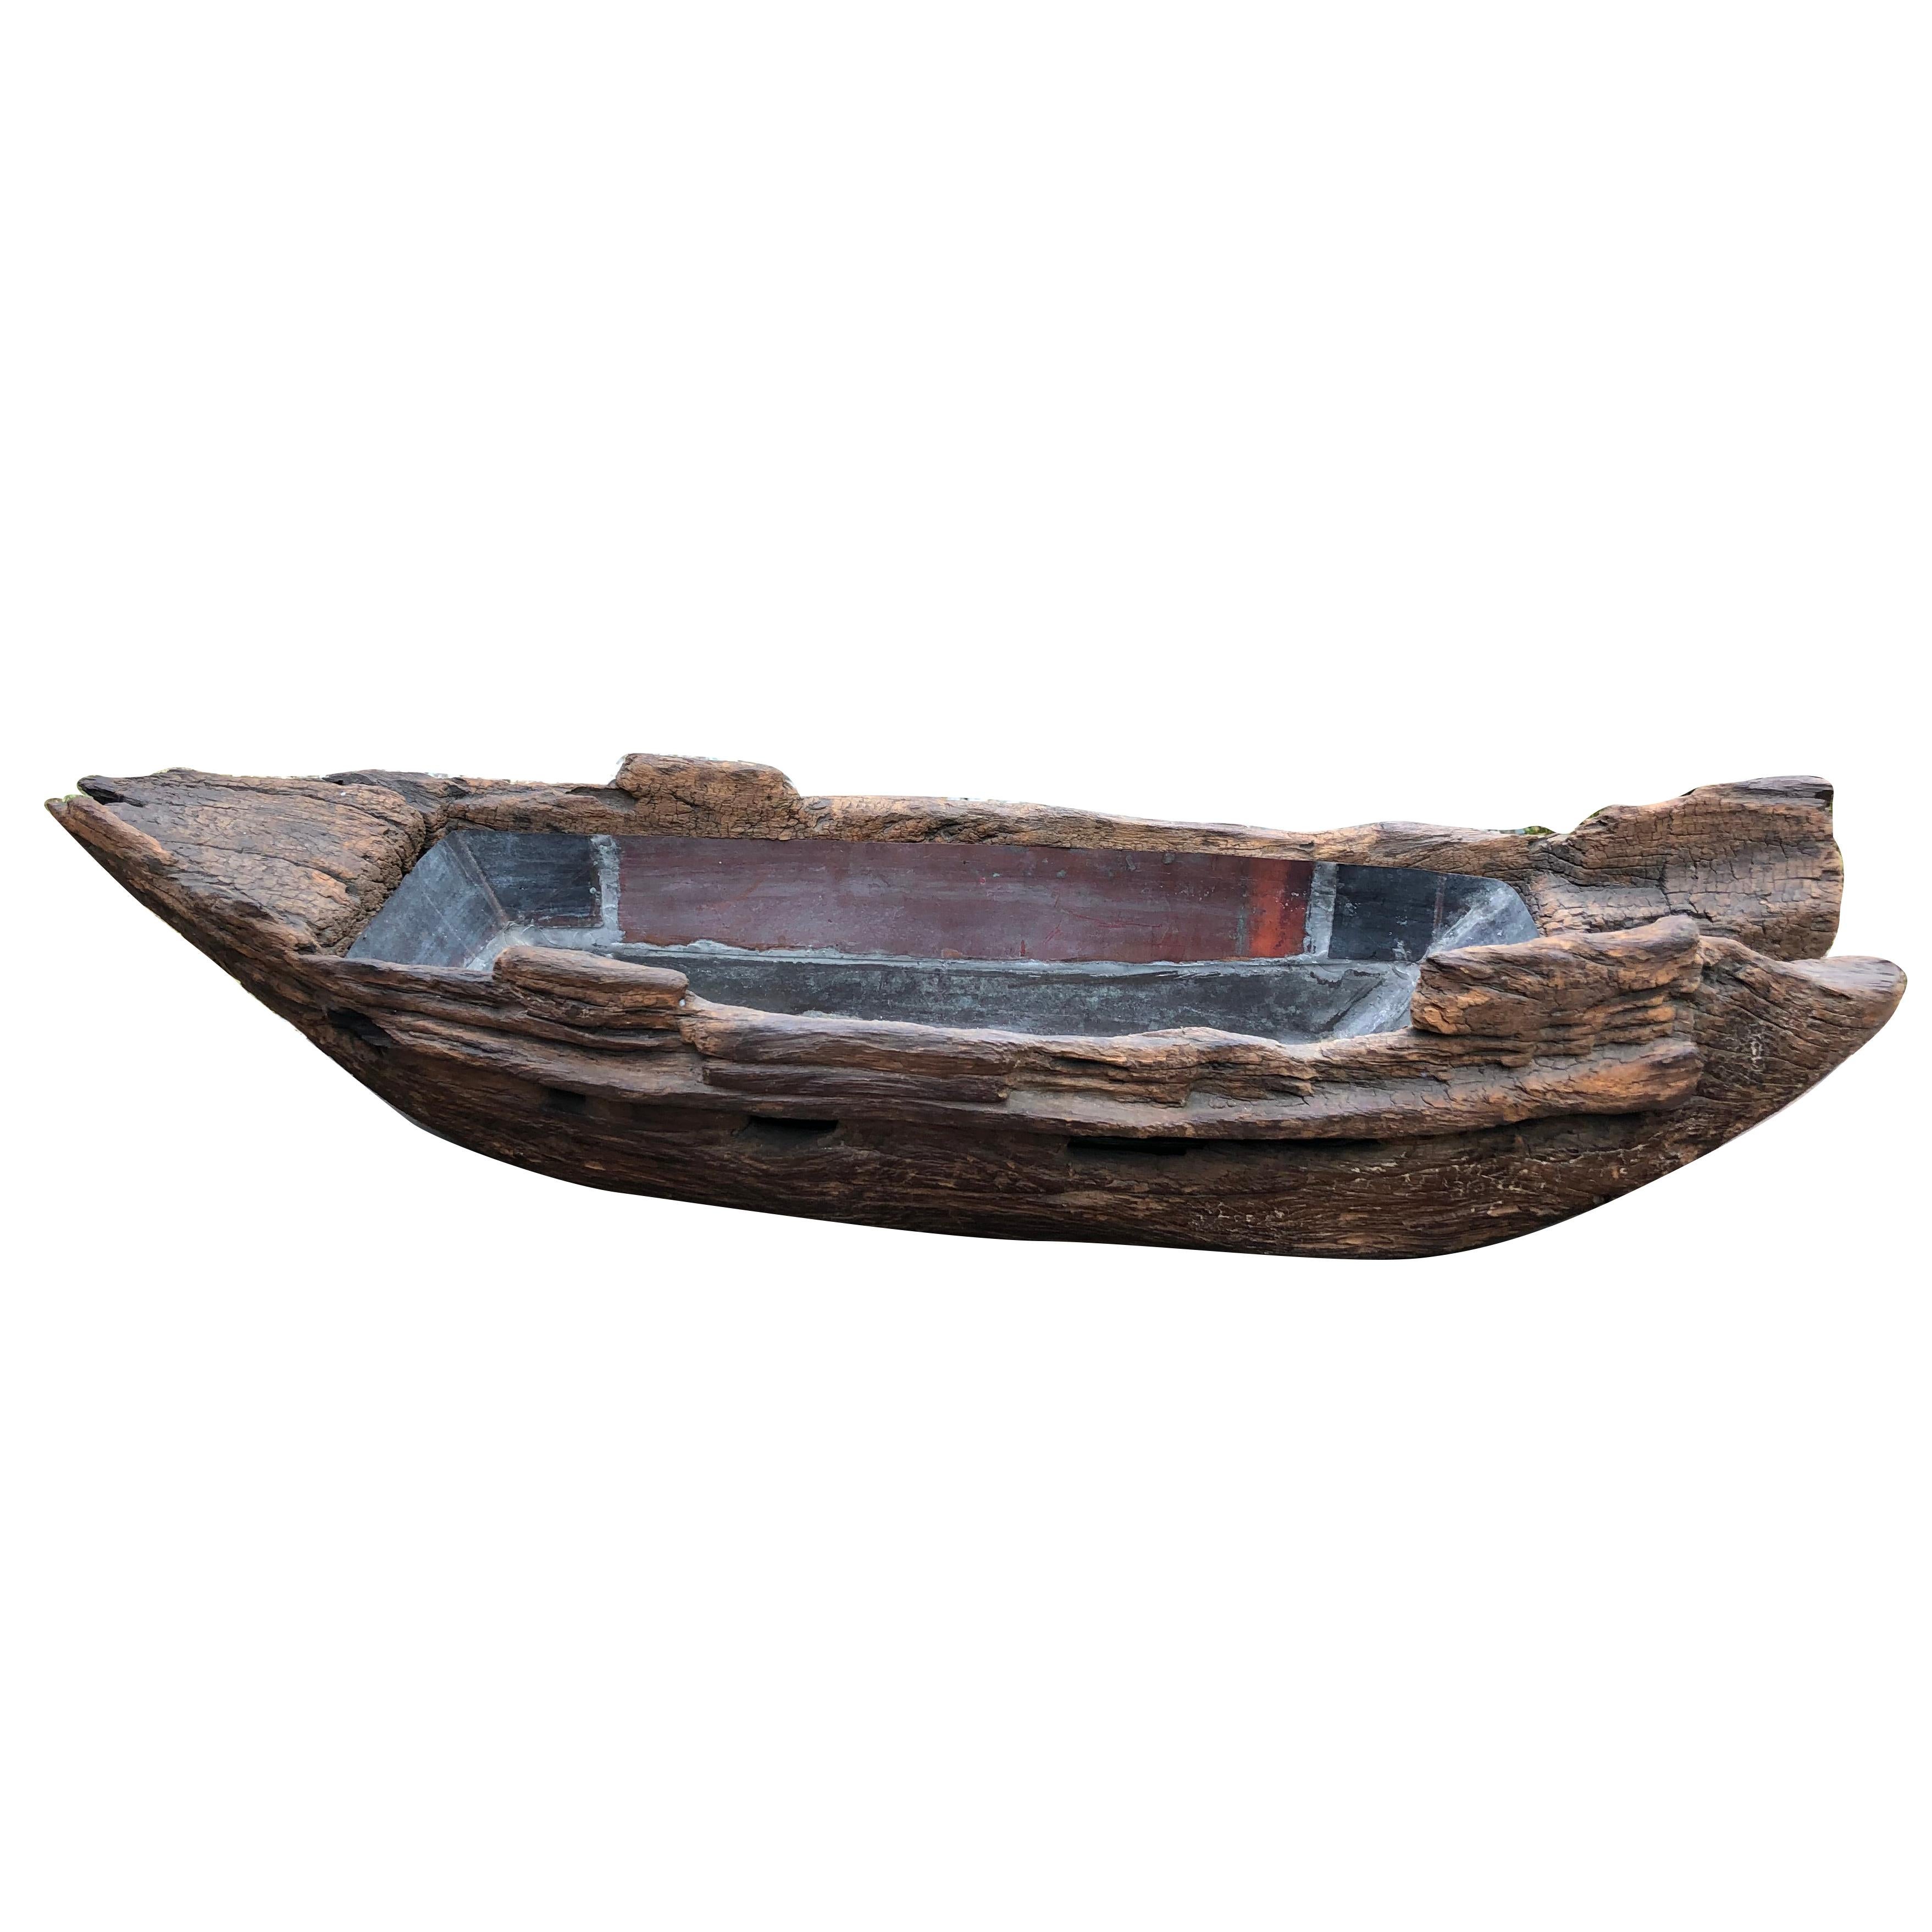 Japanese Big Antique Hand Carved Ikenobu Boat 19th Century, Boxed Hard to Find